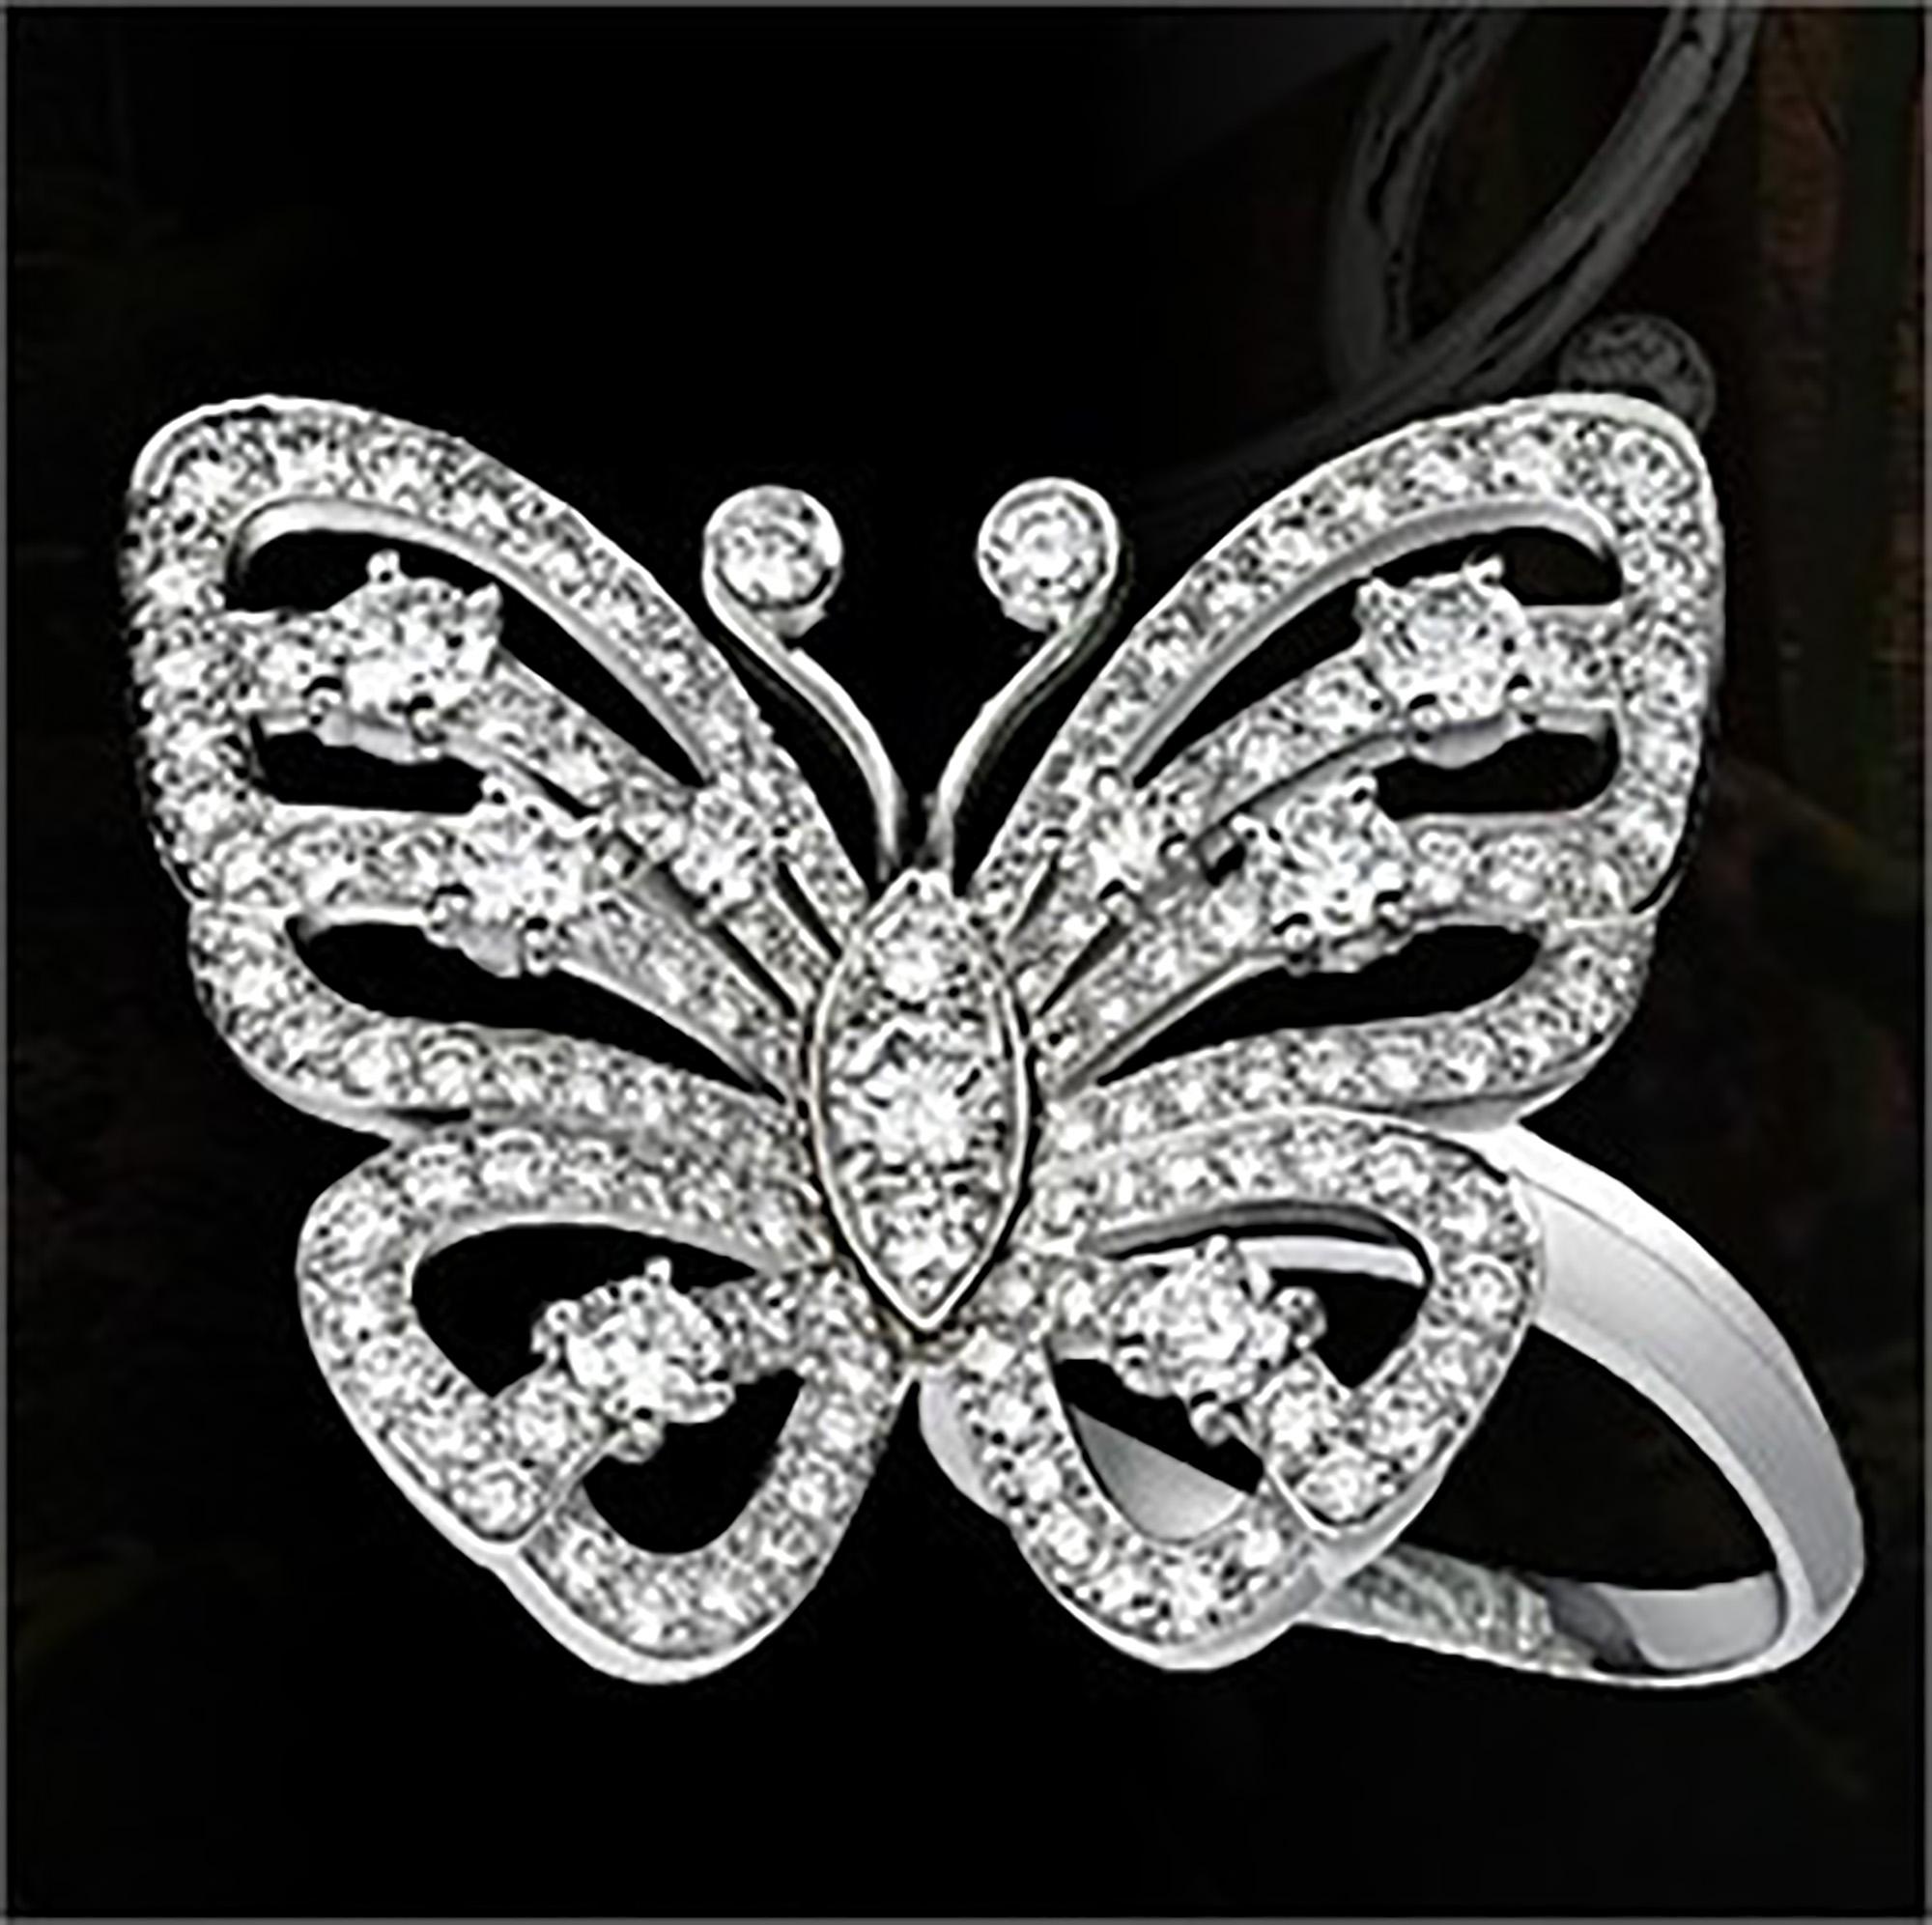 18k White Gold Diamond Flying Butterfly Between Finger Ring by Van Cleef & Arpels.  
With 131 Round brilliant cut diamonds VVS1 clarity, E color total weight approx. 3.11ct
This ring comes with Van Cleef & Arpels box.
Retail Price: $42,200 plus